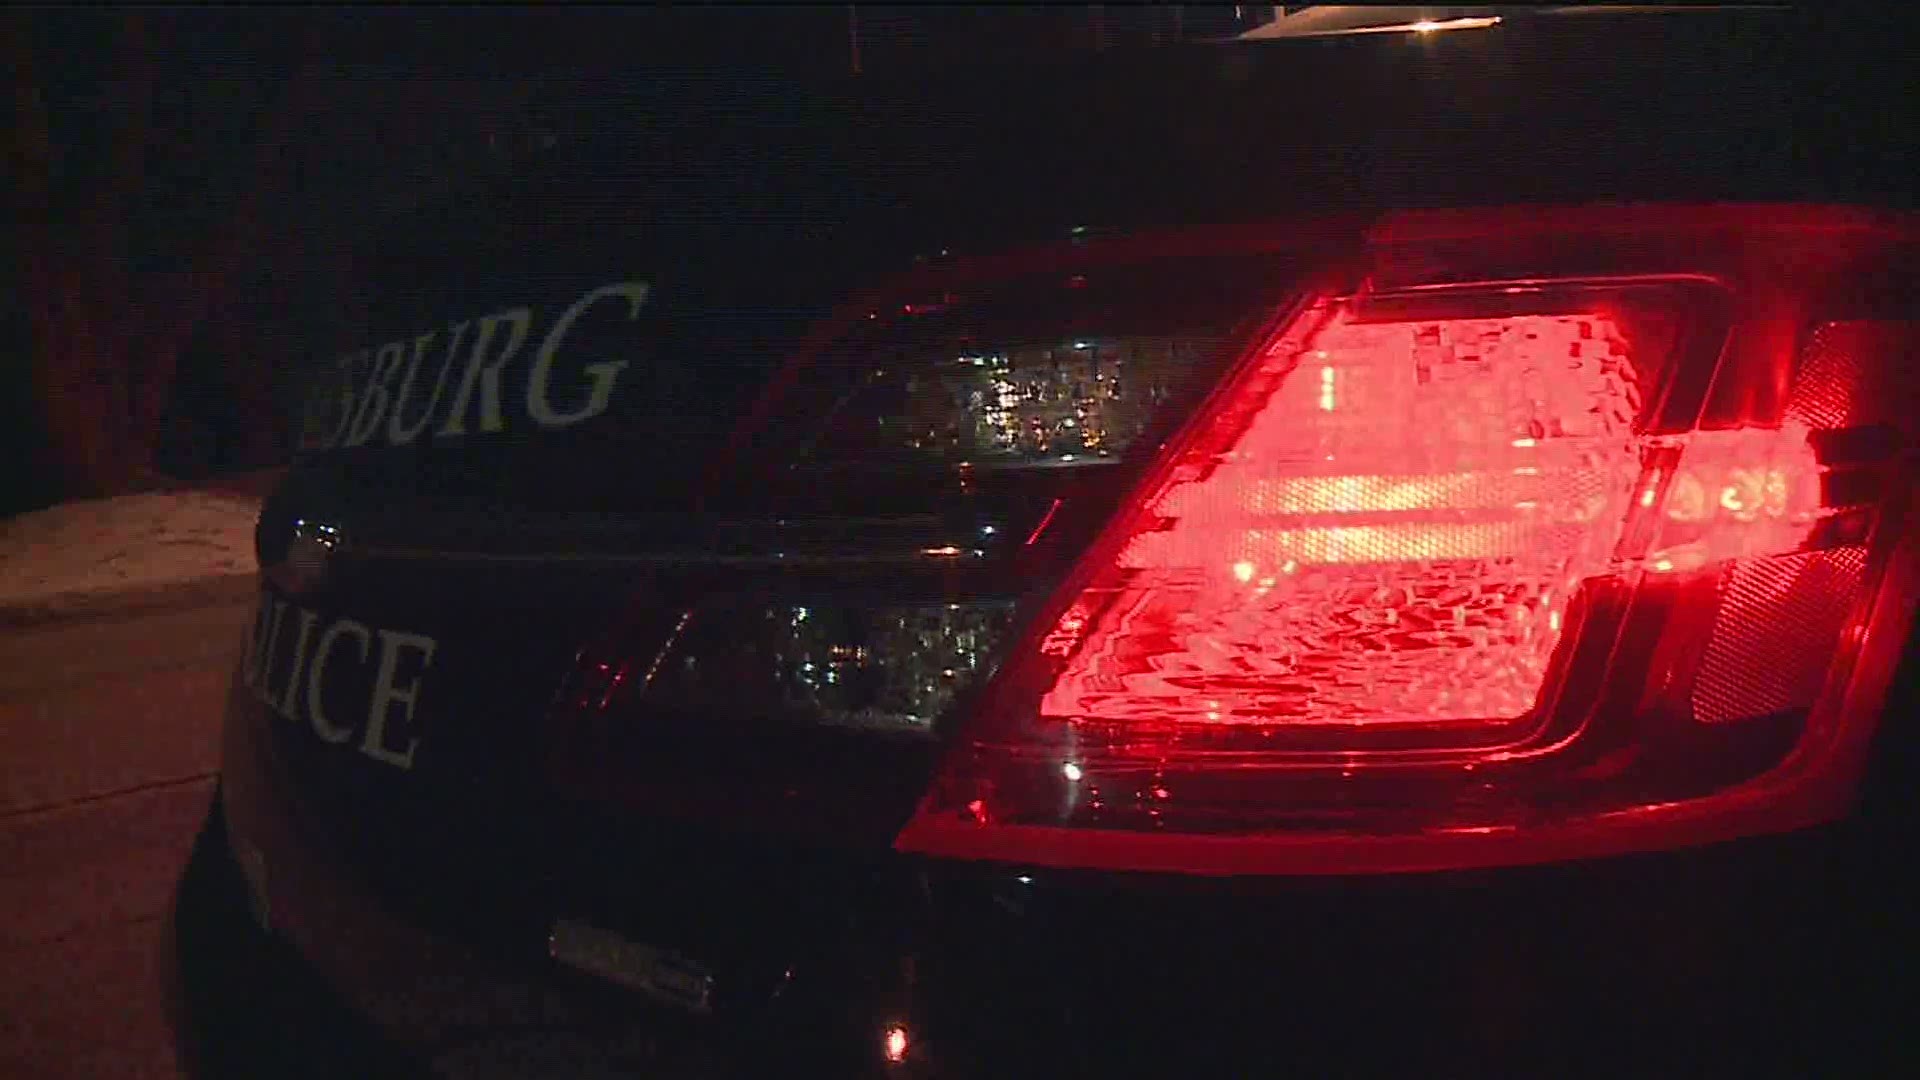 A Galesburg police officer can officially perform an extra poke during a traffic stop.